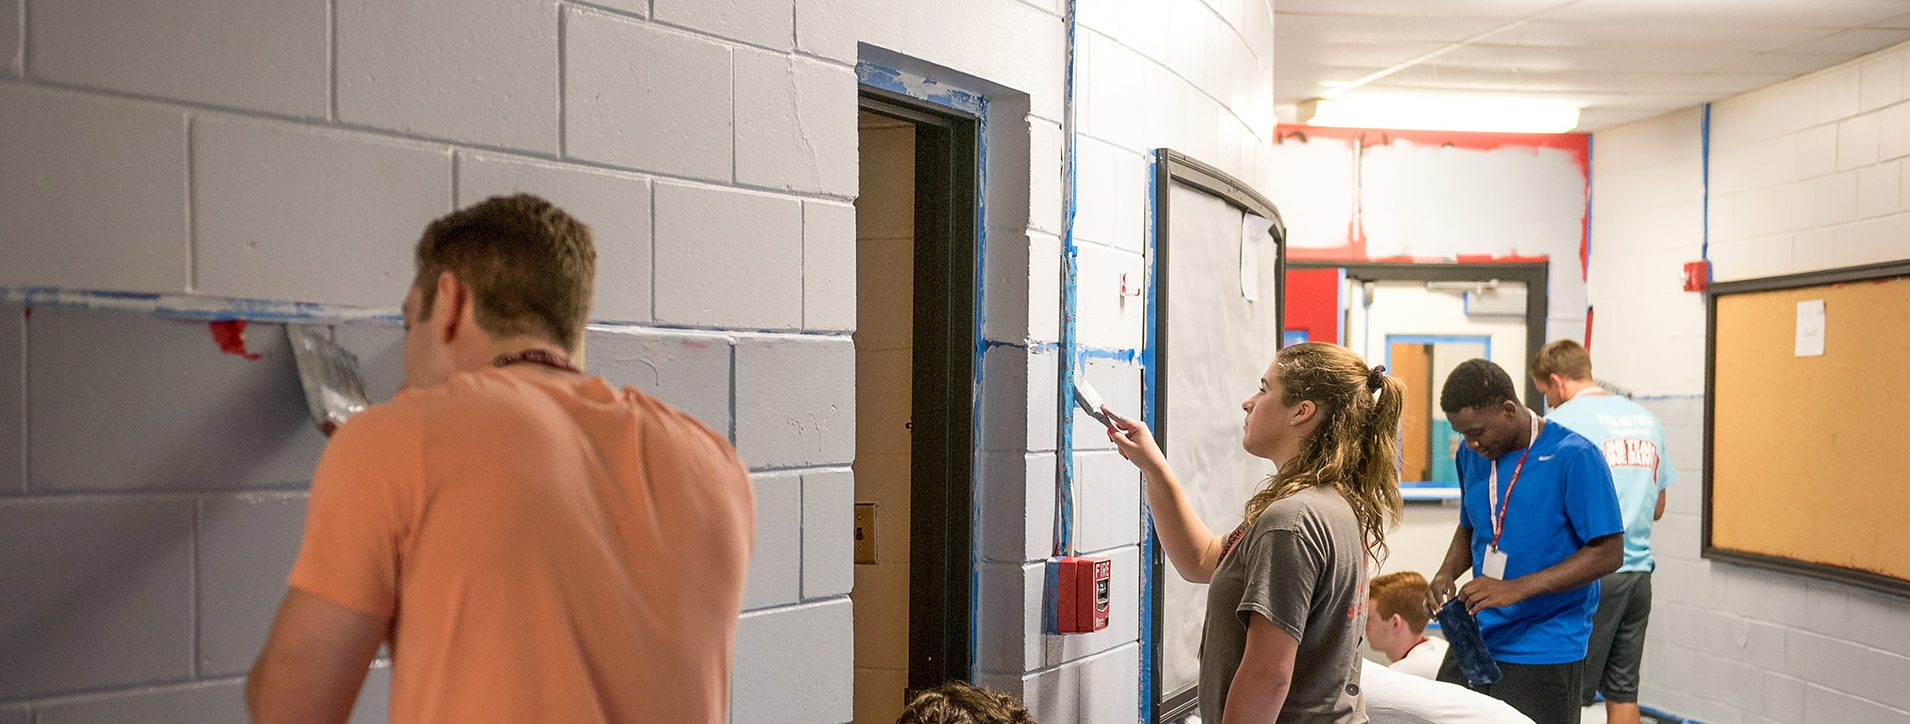 Story Image - Students painting an elementary school's walls to help out